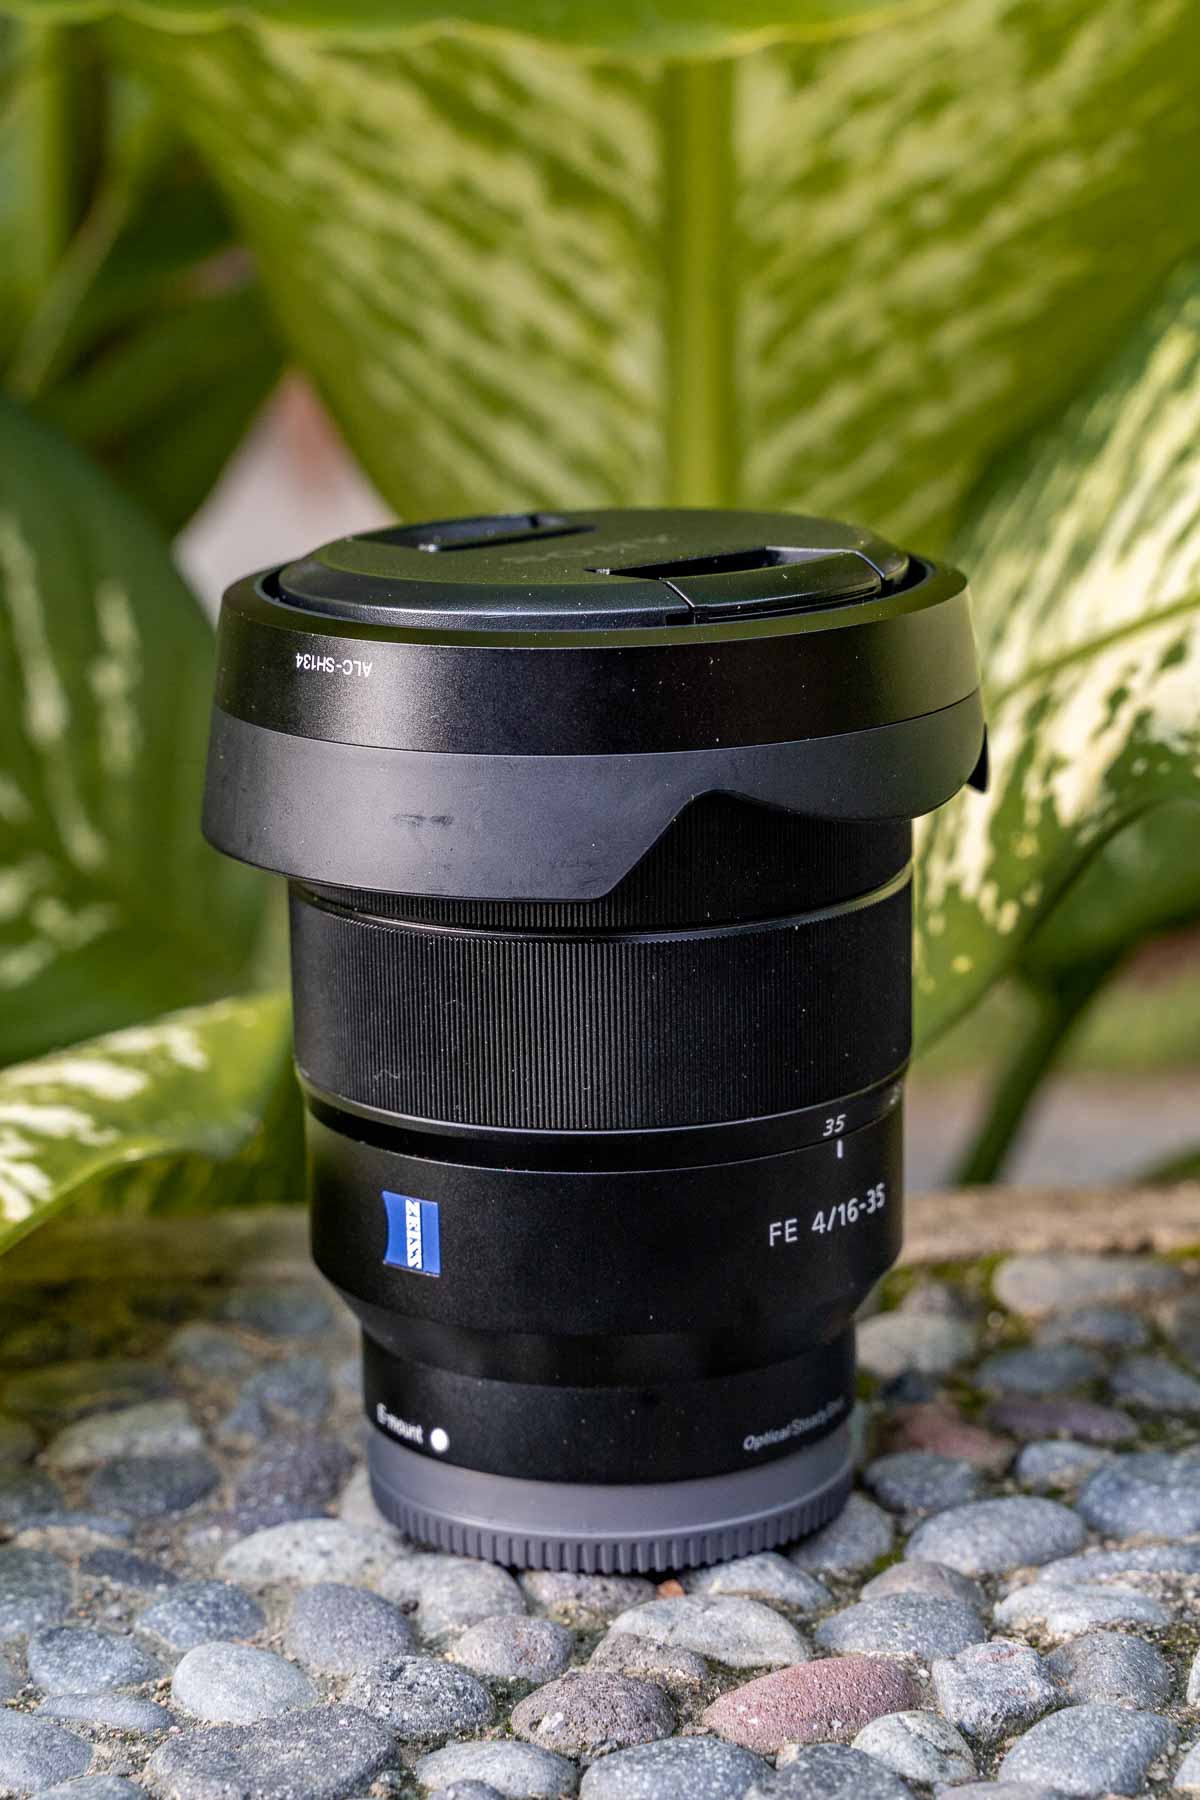 Sony 16-35mm f4 wide angle lens